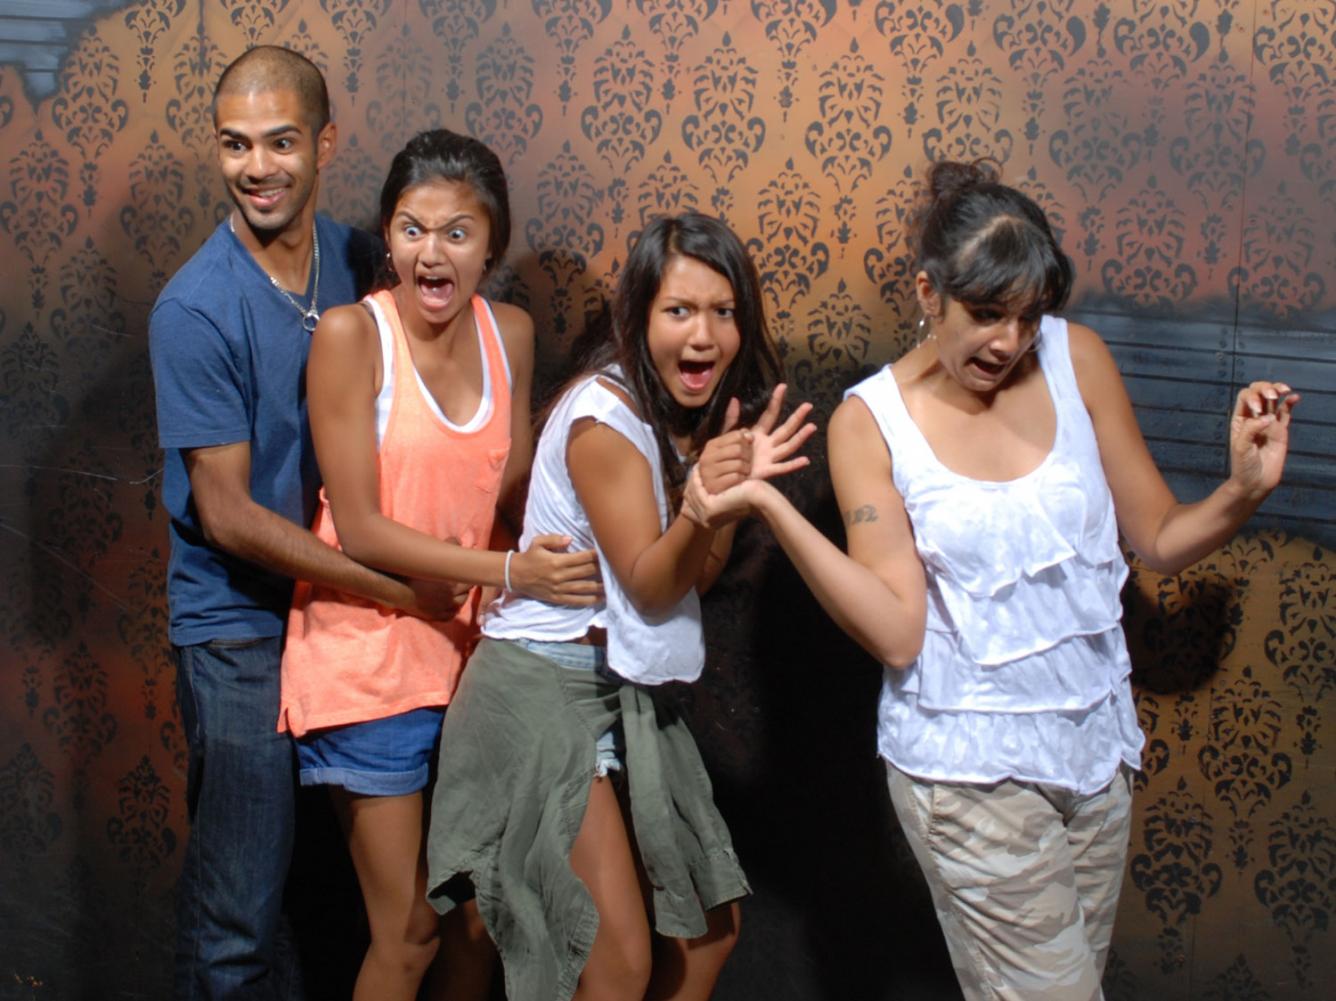 Nightmares Fear Factory Top 40 September 2013 pic0050